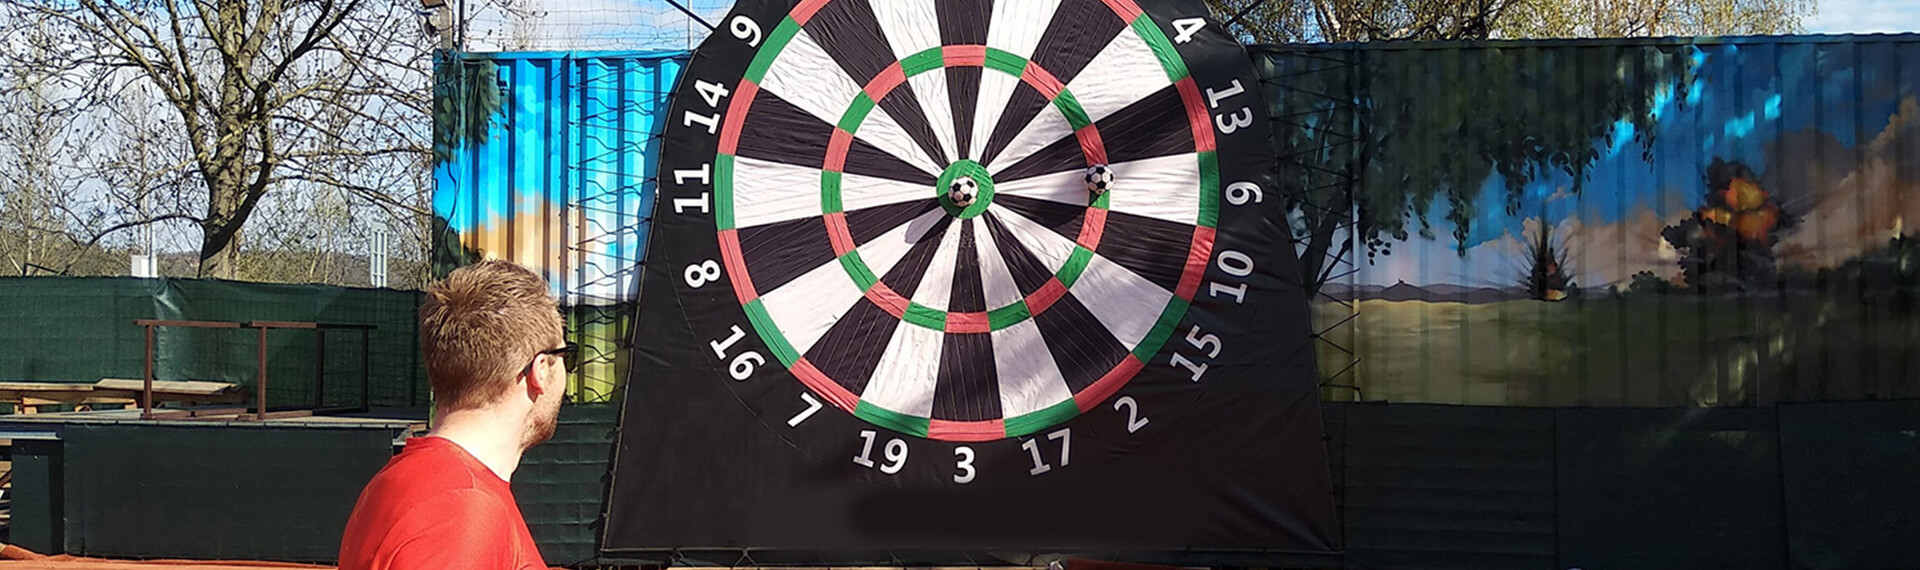 Football Darts Hamburg for Stag Dos | Pissup